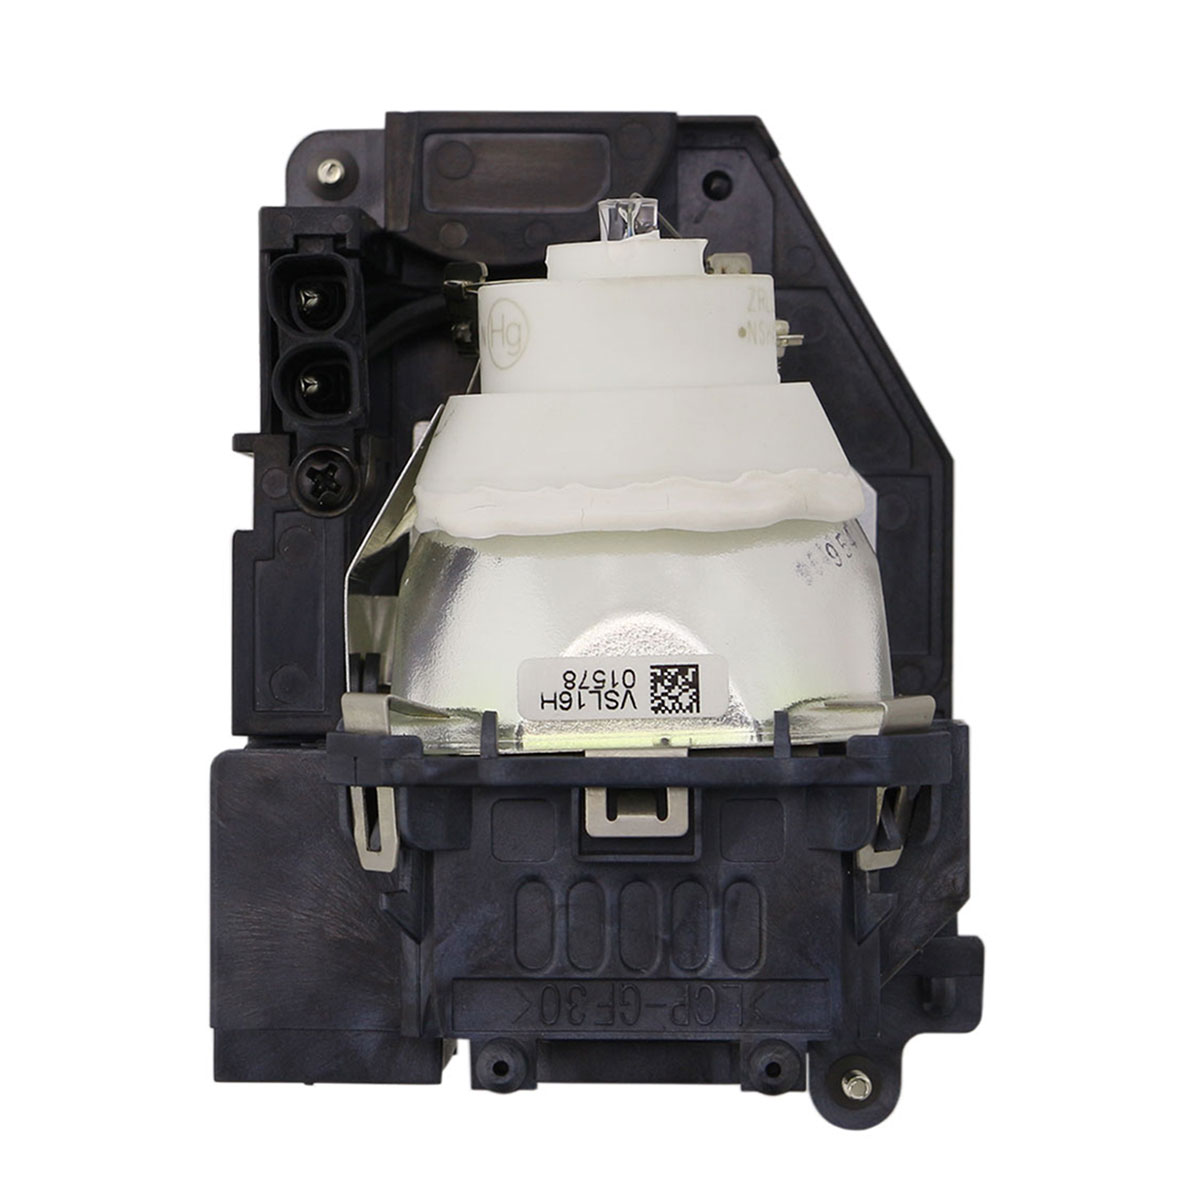 Original Ushio Replacement Lamp & Housing for the NEC UM330Wi Projector - image 4 of 7